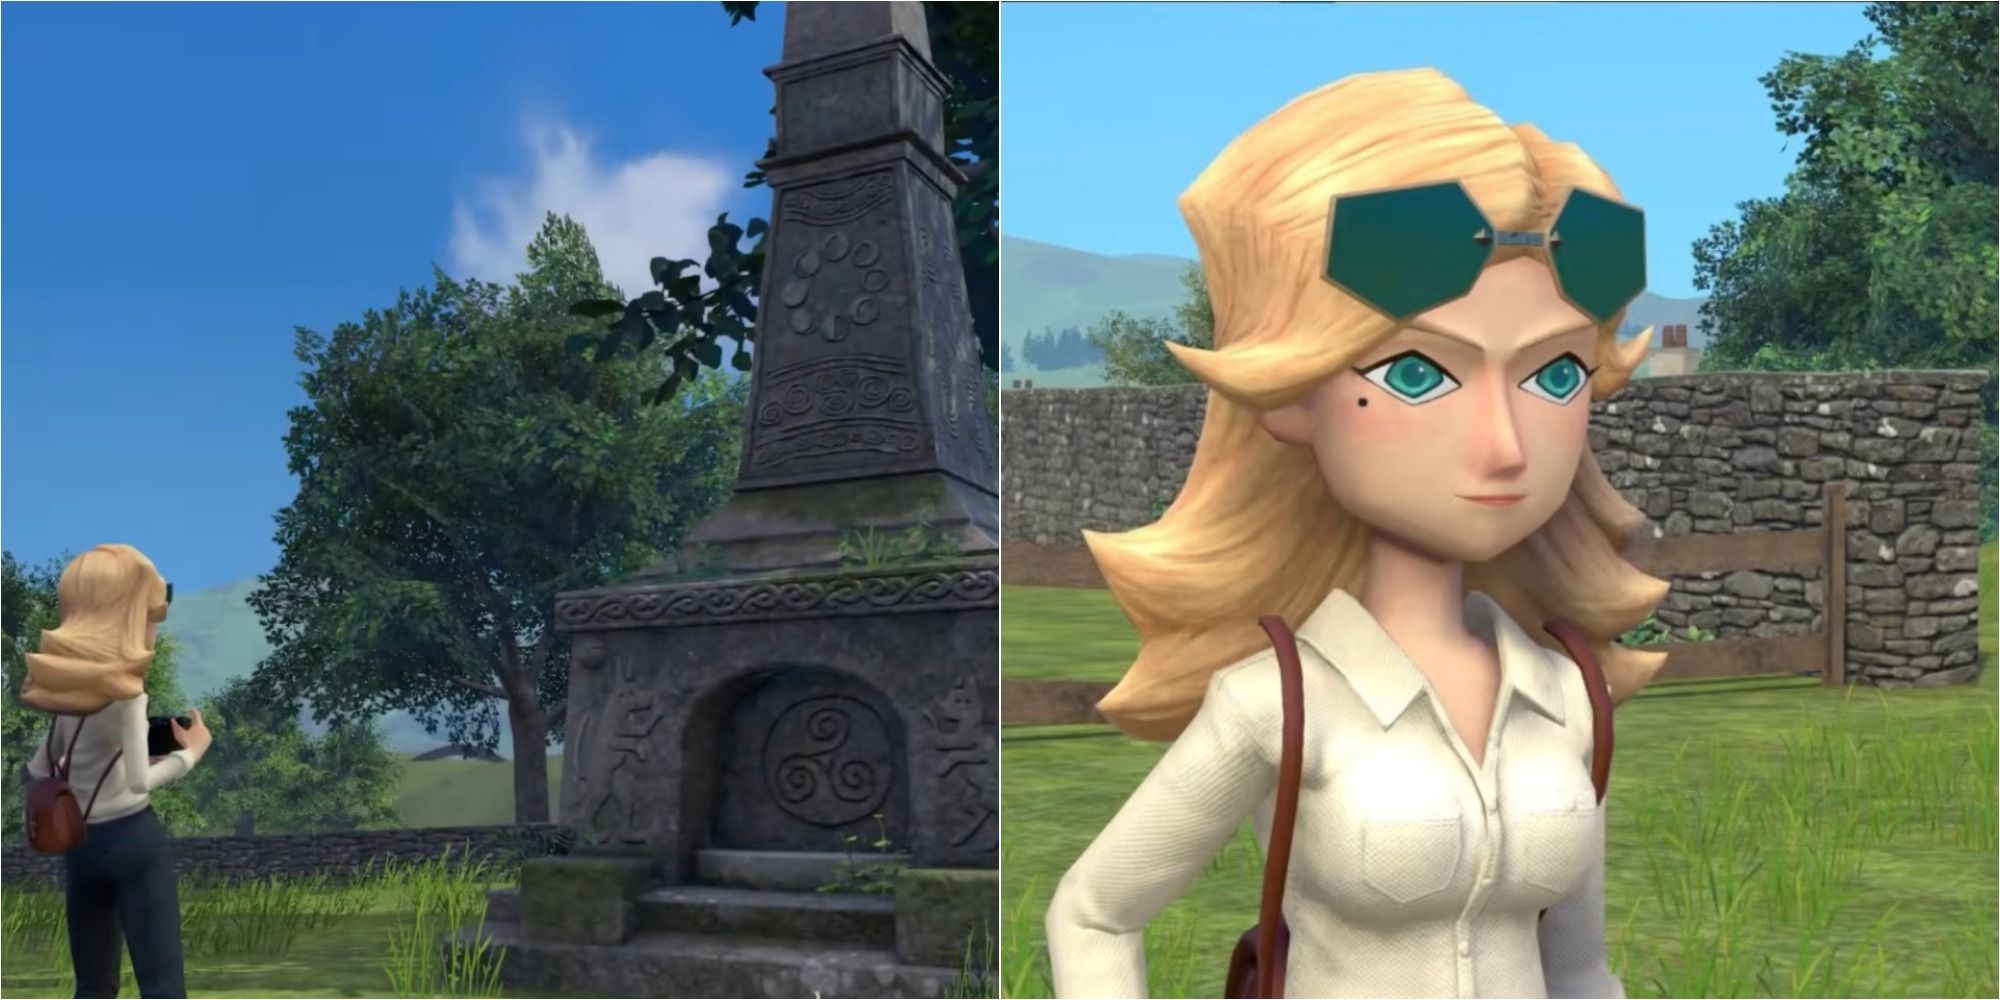 The Good Life Fast Travel Guide Featured Split Image Of Shrine and Protagonist